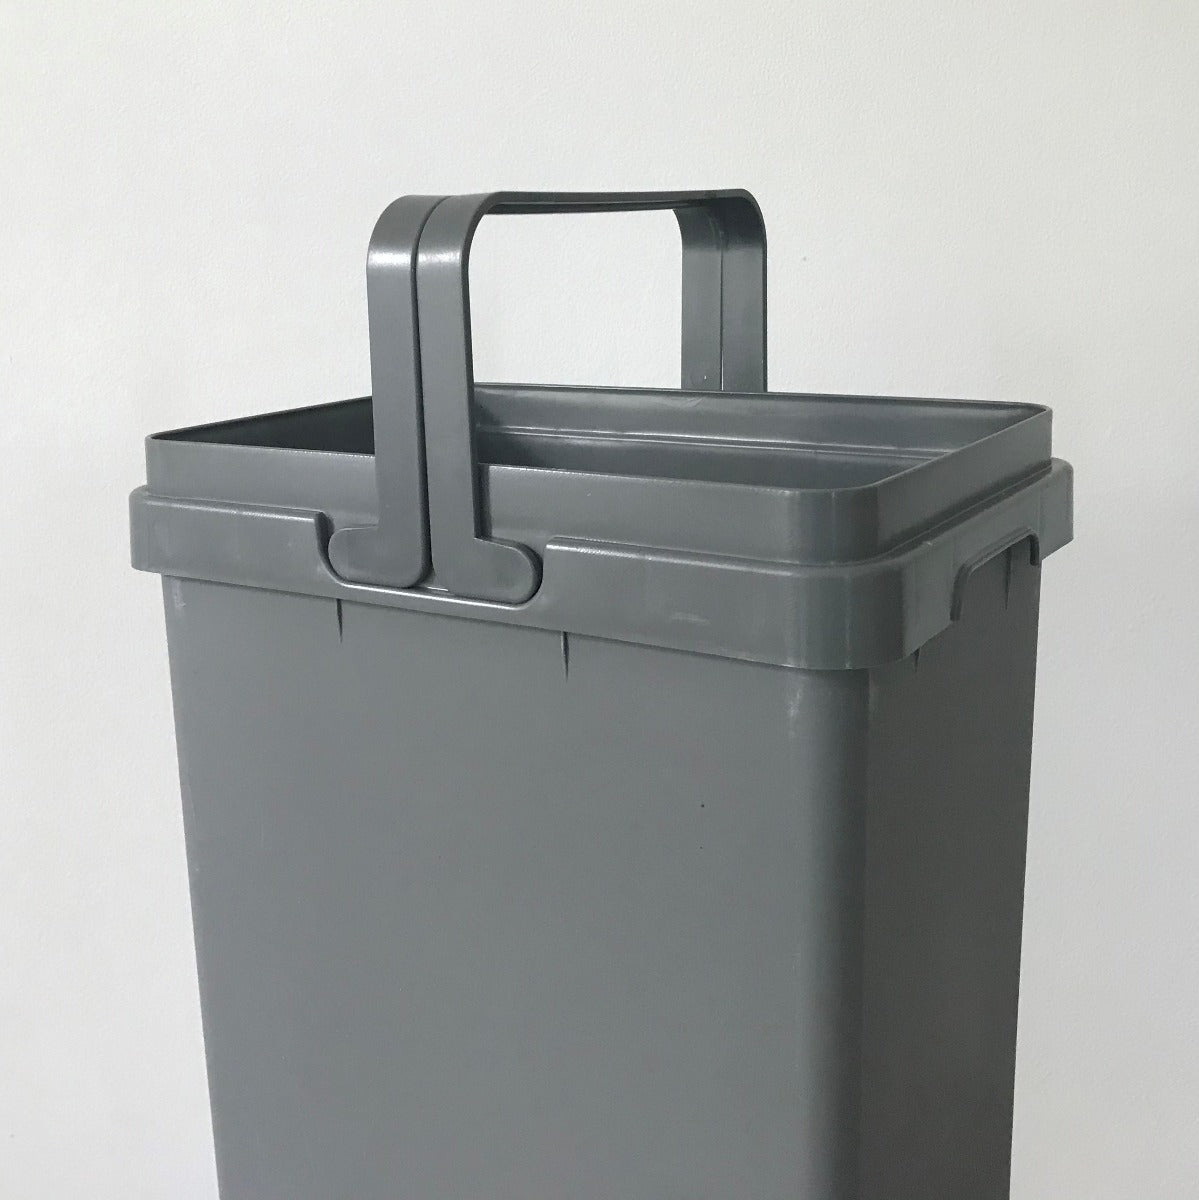 Each of the 32l buckets has handles to make it easy to remove them for cleaning.the bin container